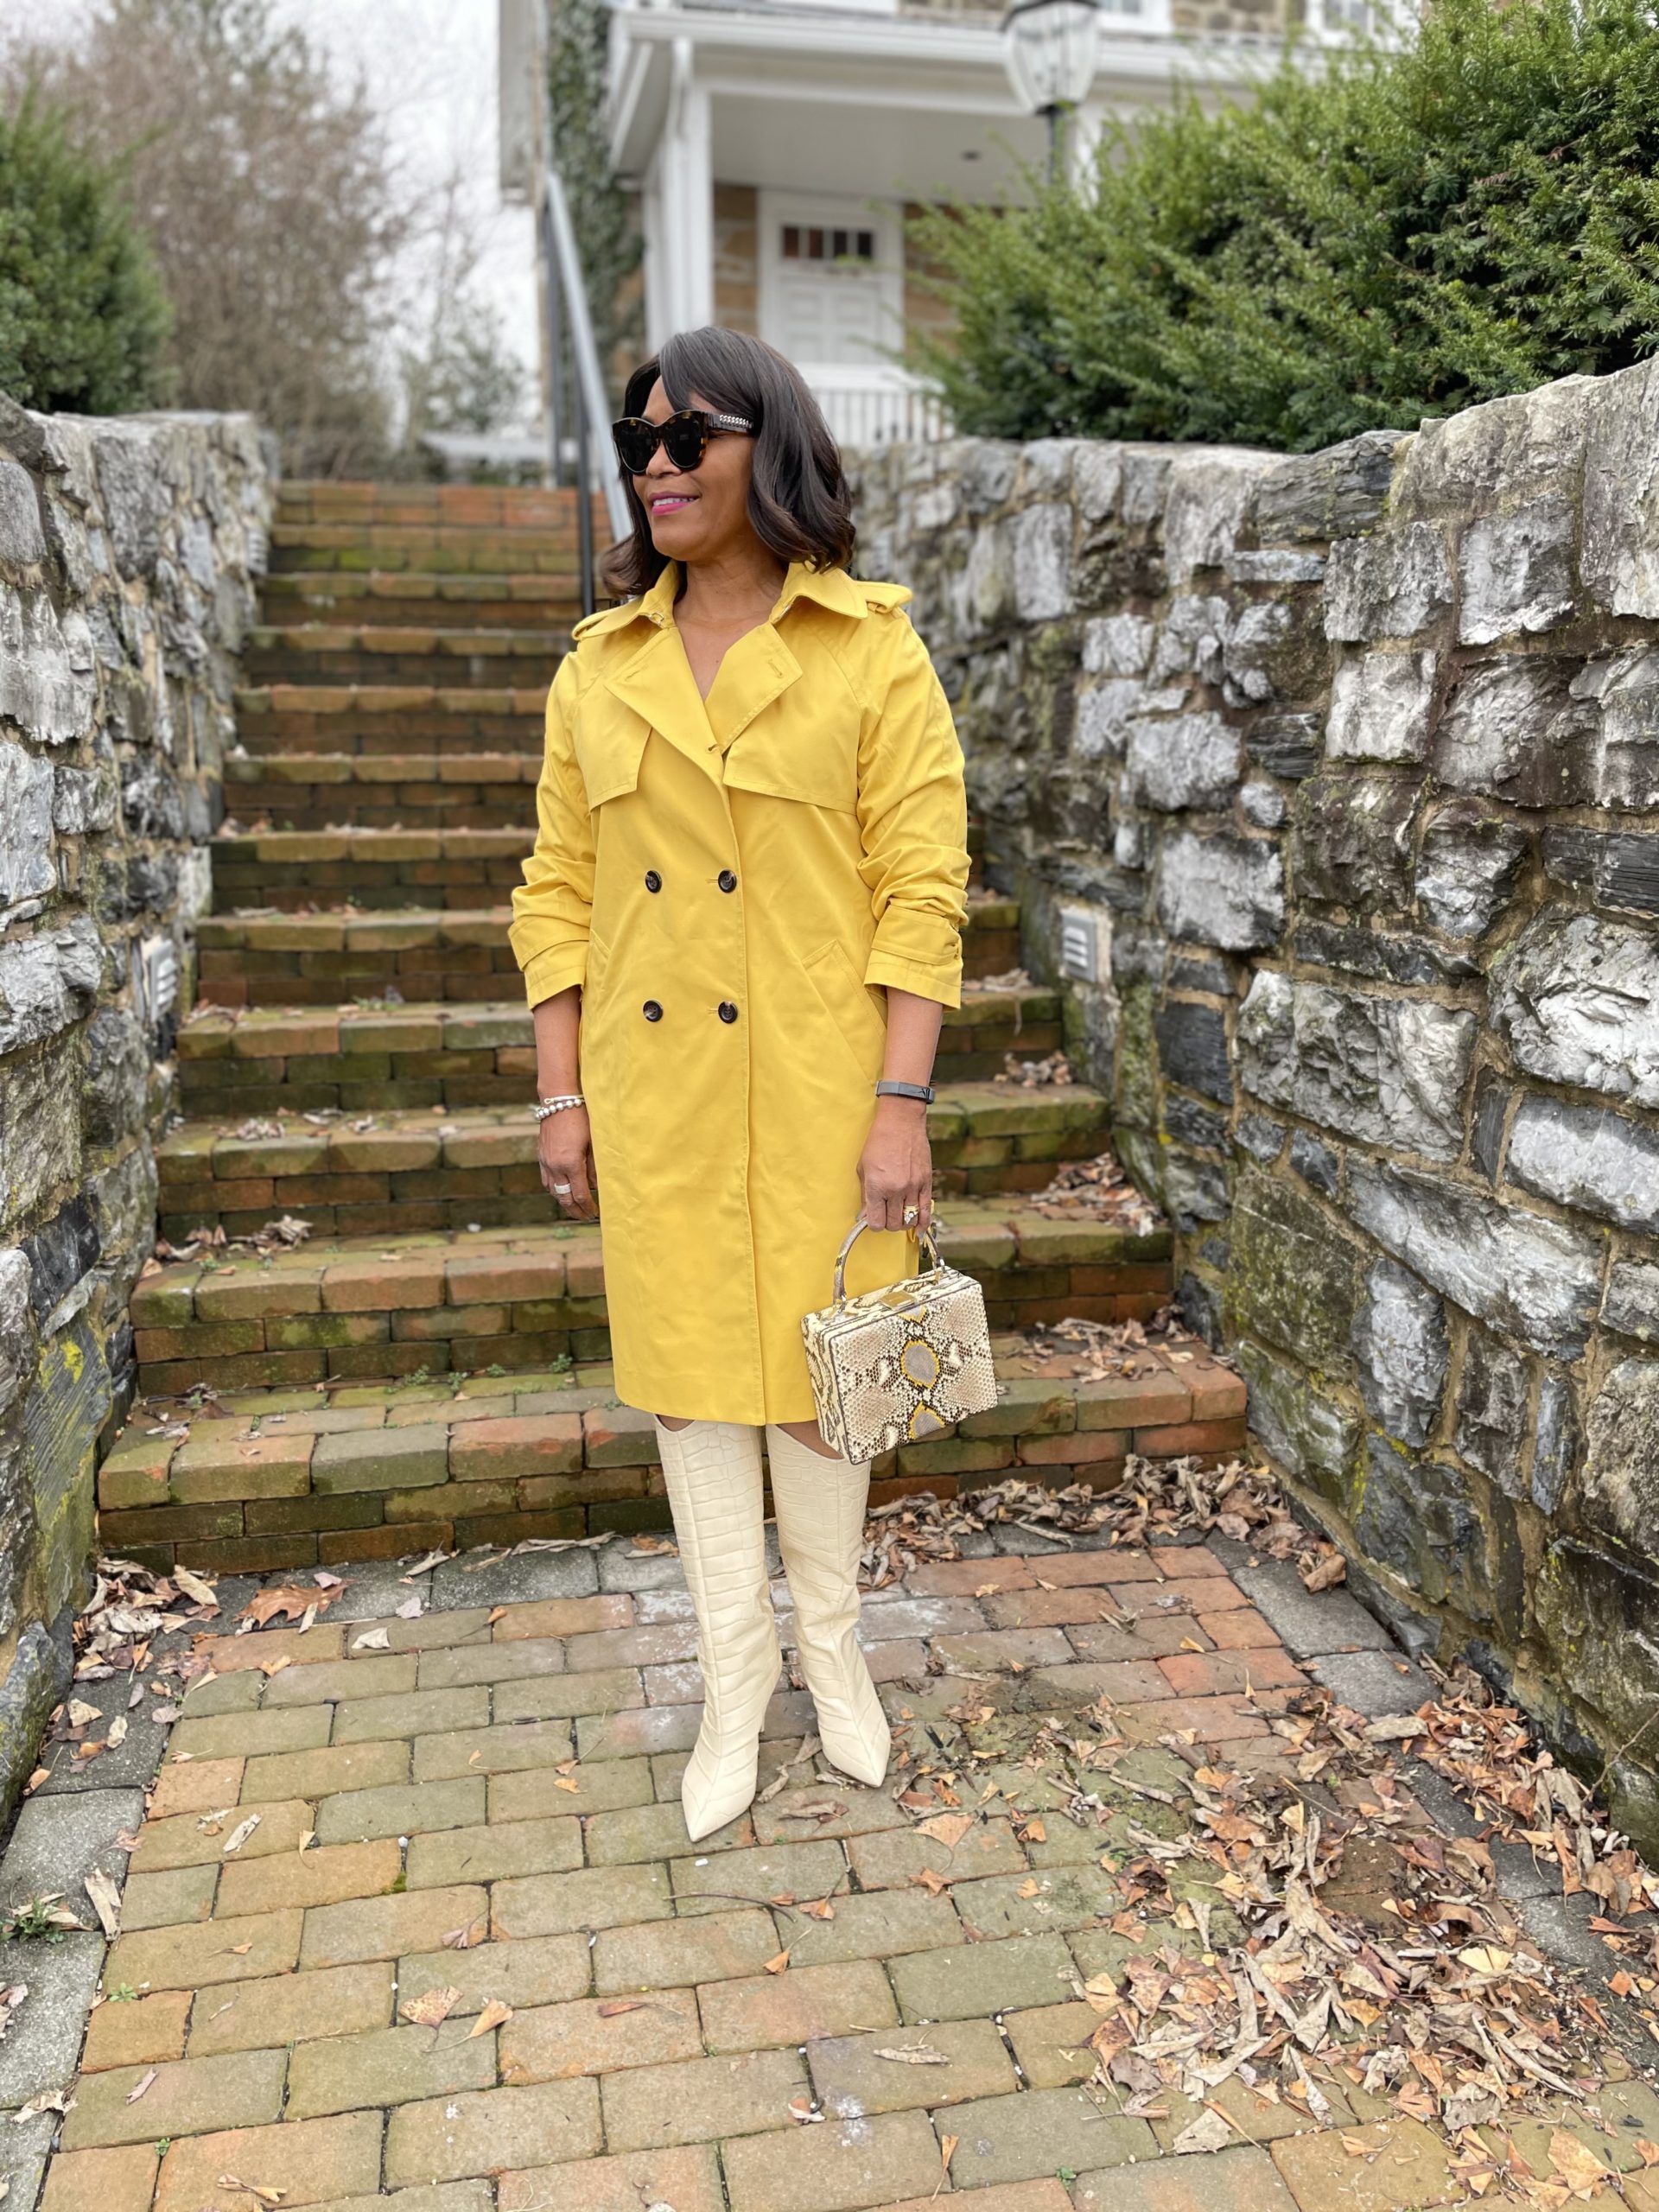 This Ann Taylor Twill Yellow Trench is helping to elevate a sunny perspective this spring.